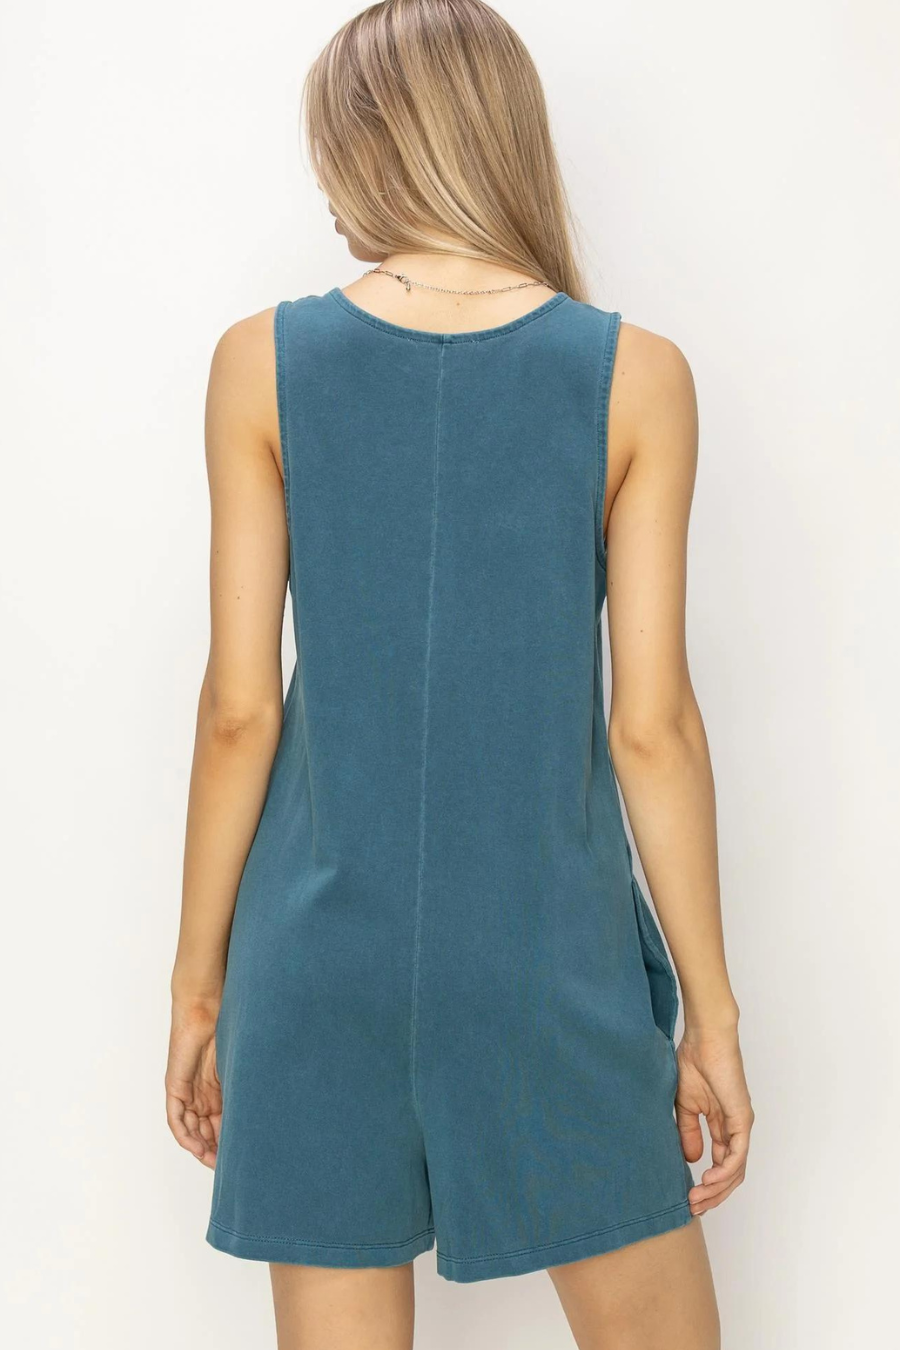 showing back view of girl in teal romper 